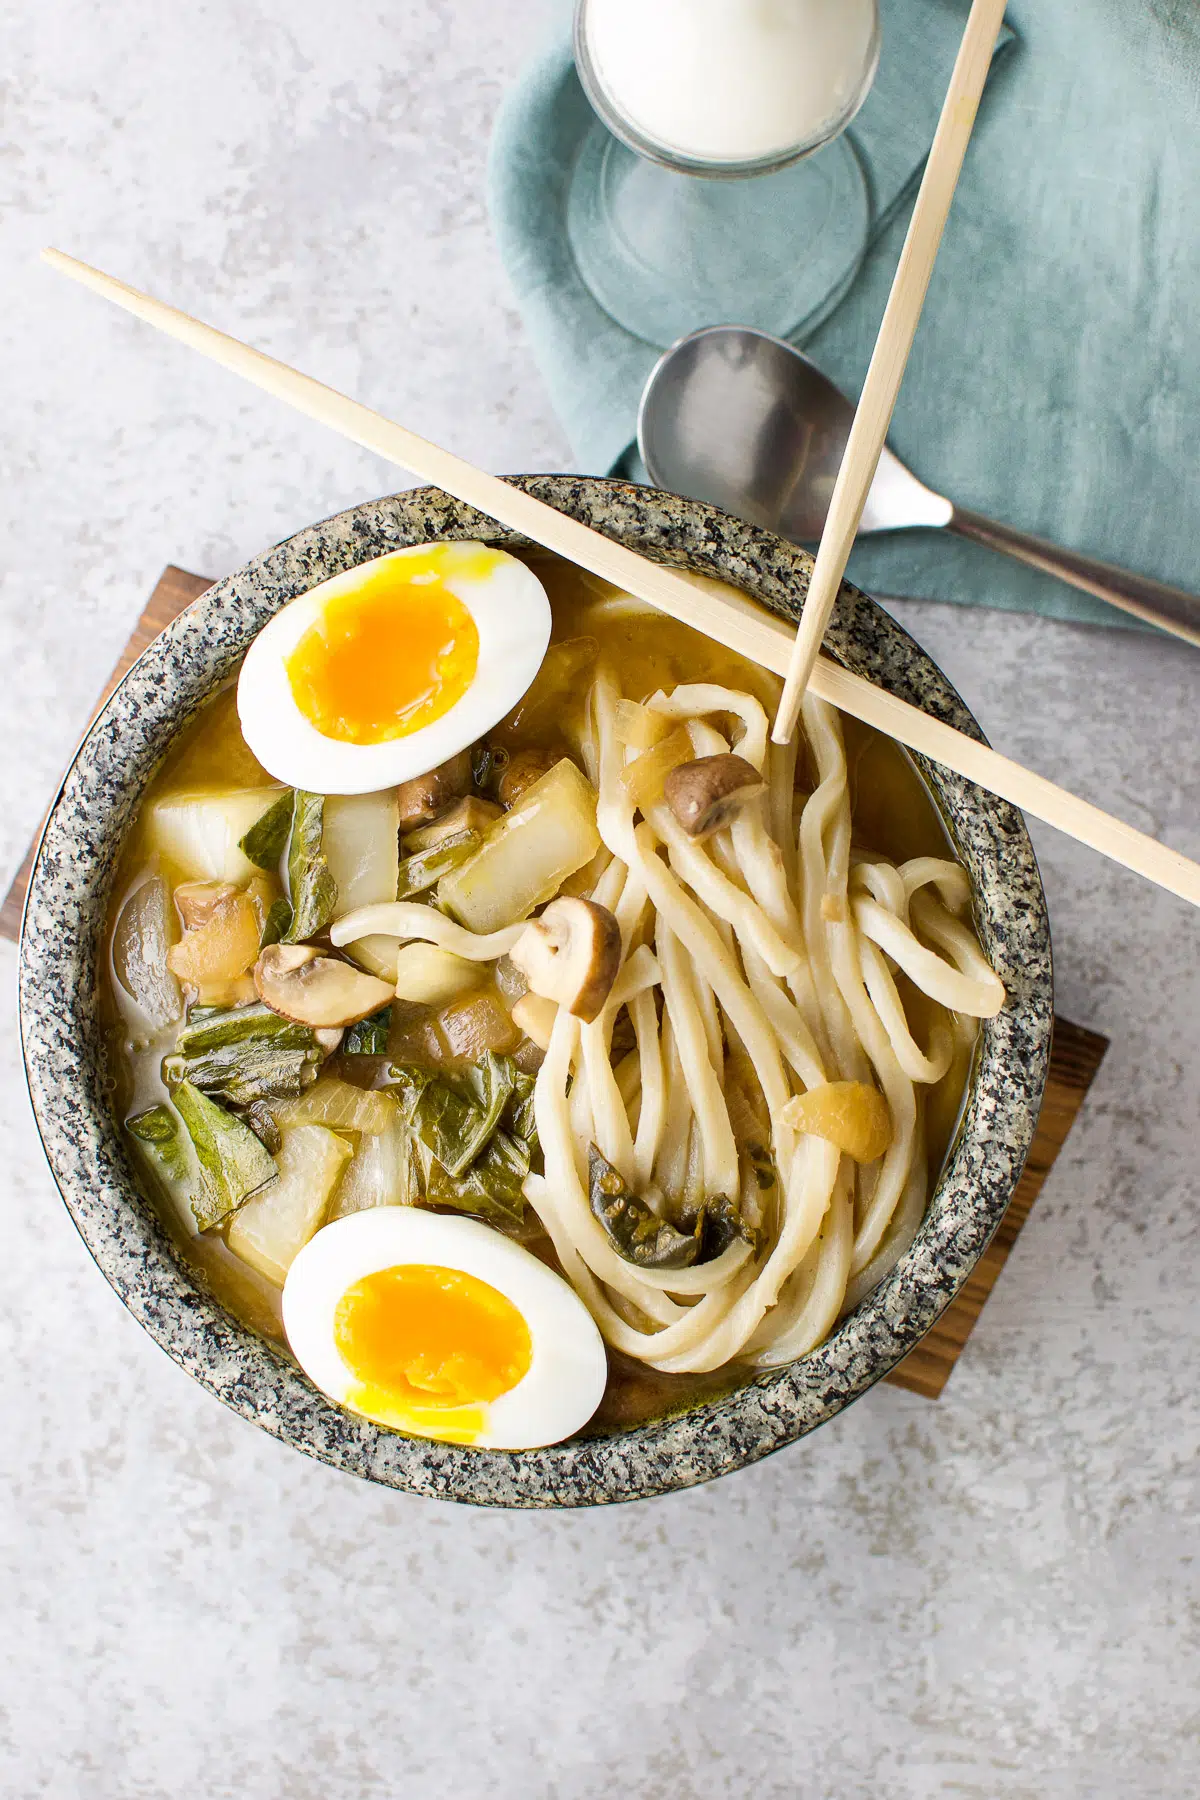 Overhead view of the soup in a bowl with egg in it and chopsticks on the bowl